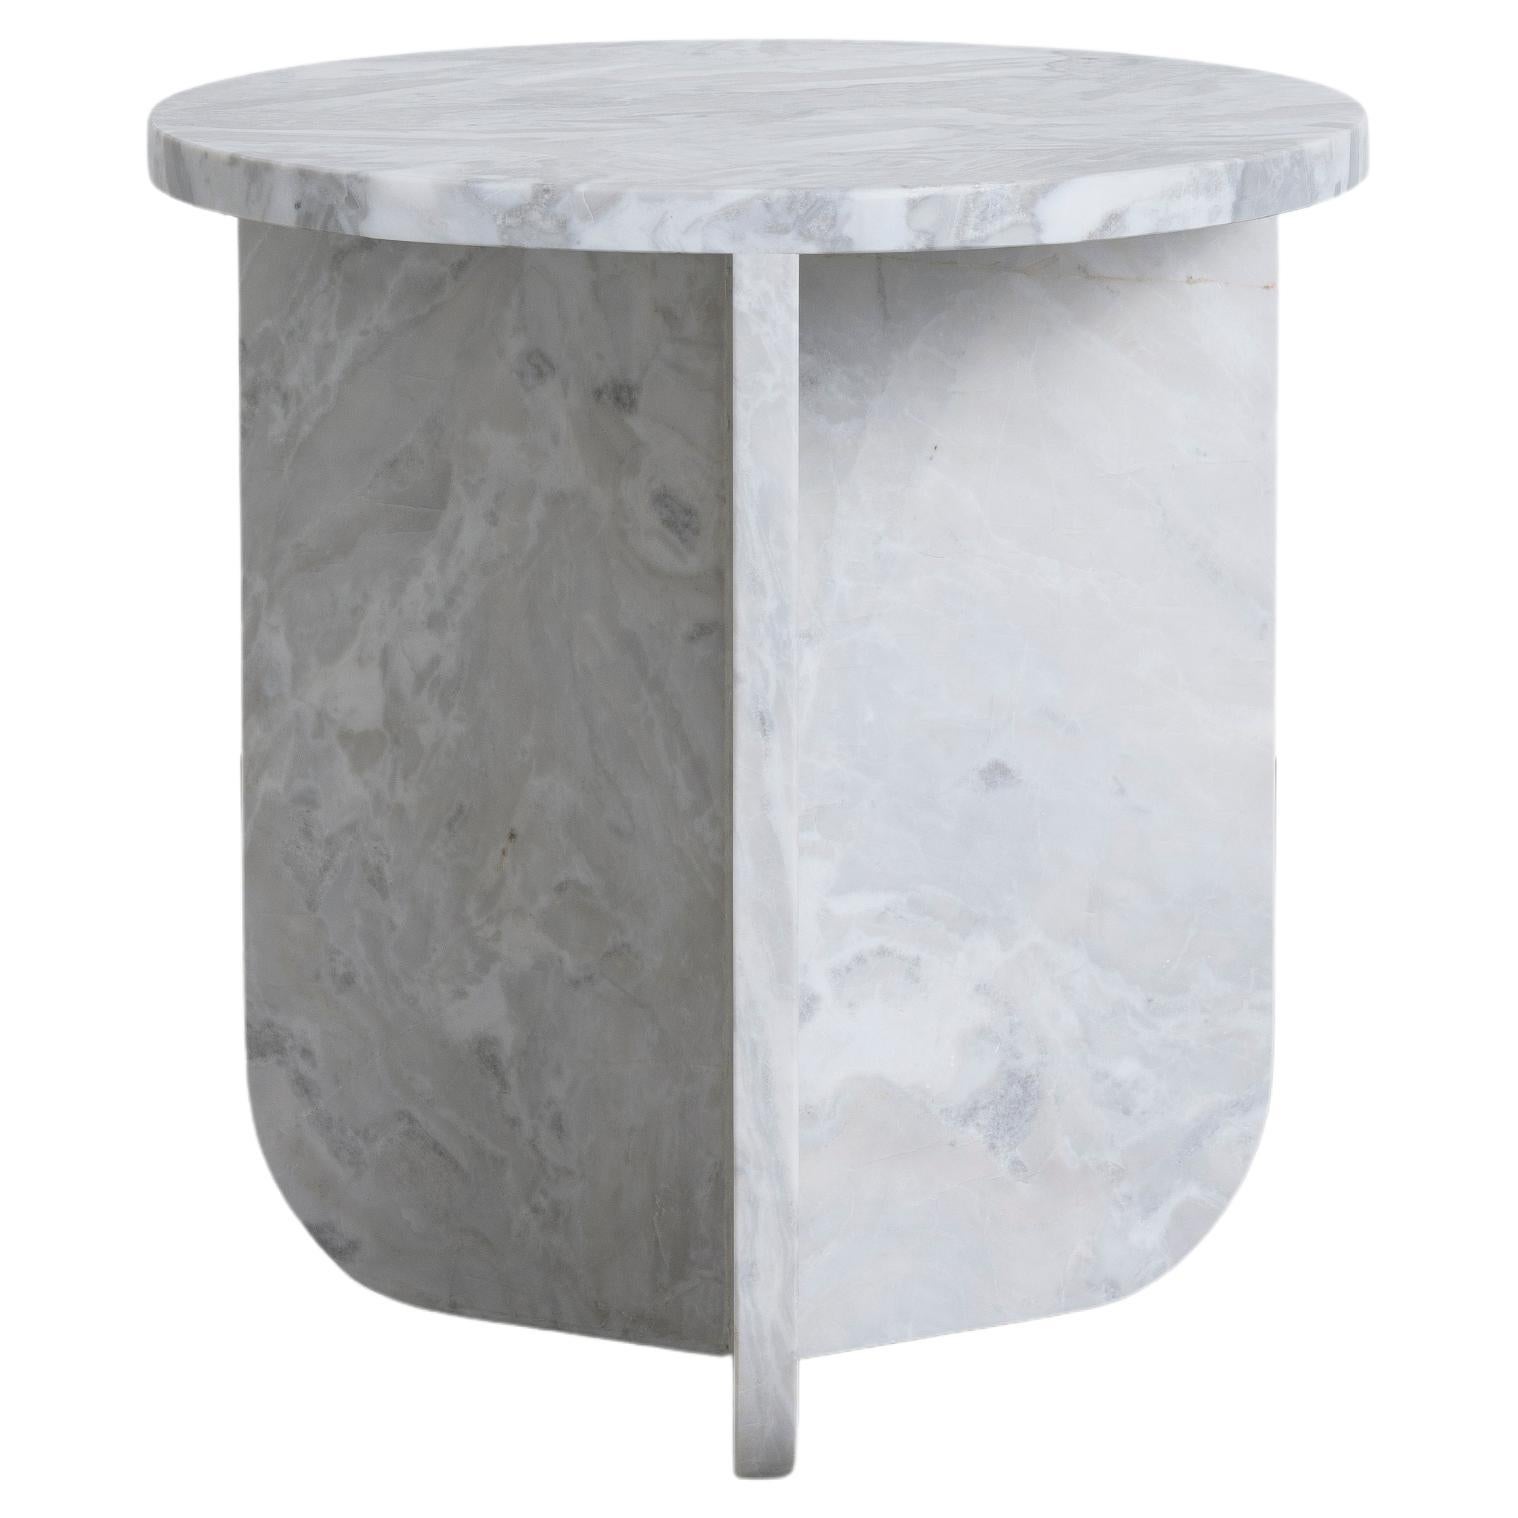 Leme Table, High, by Rain, Contemporary Side Table, Grey Alba Marble